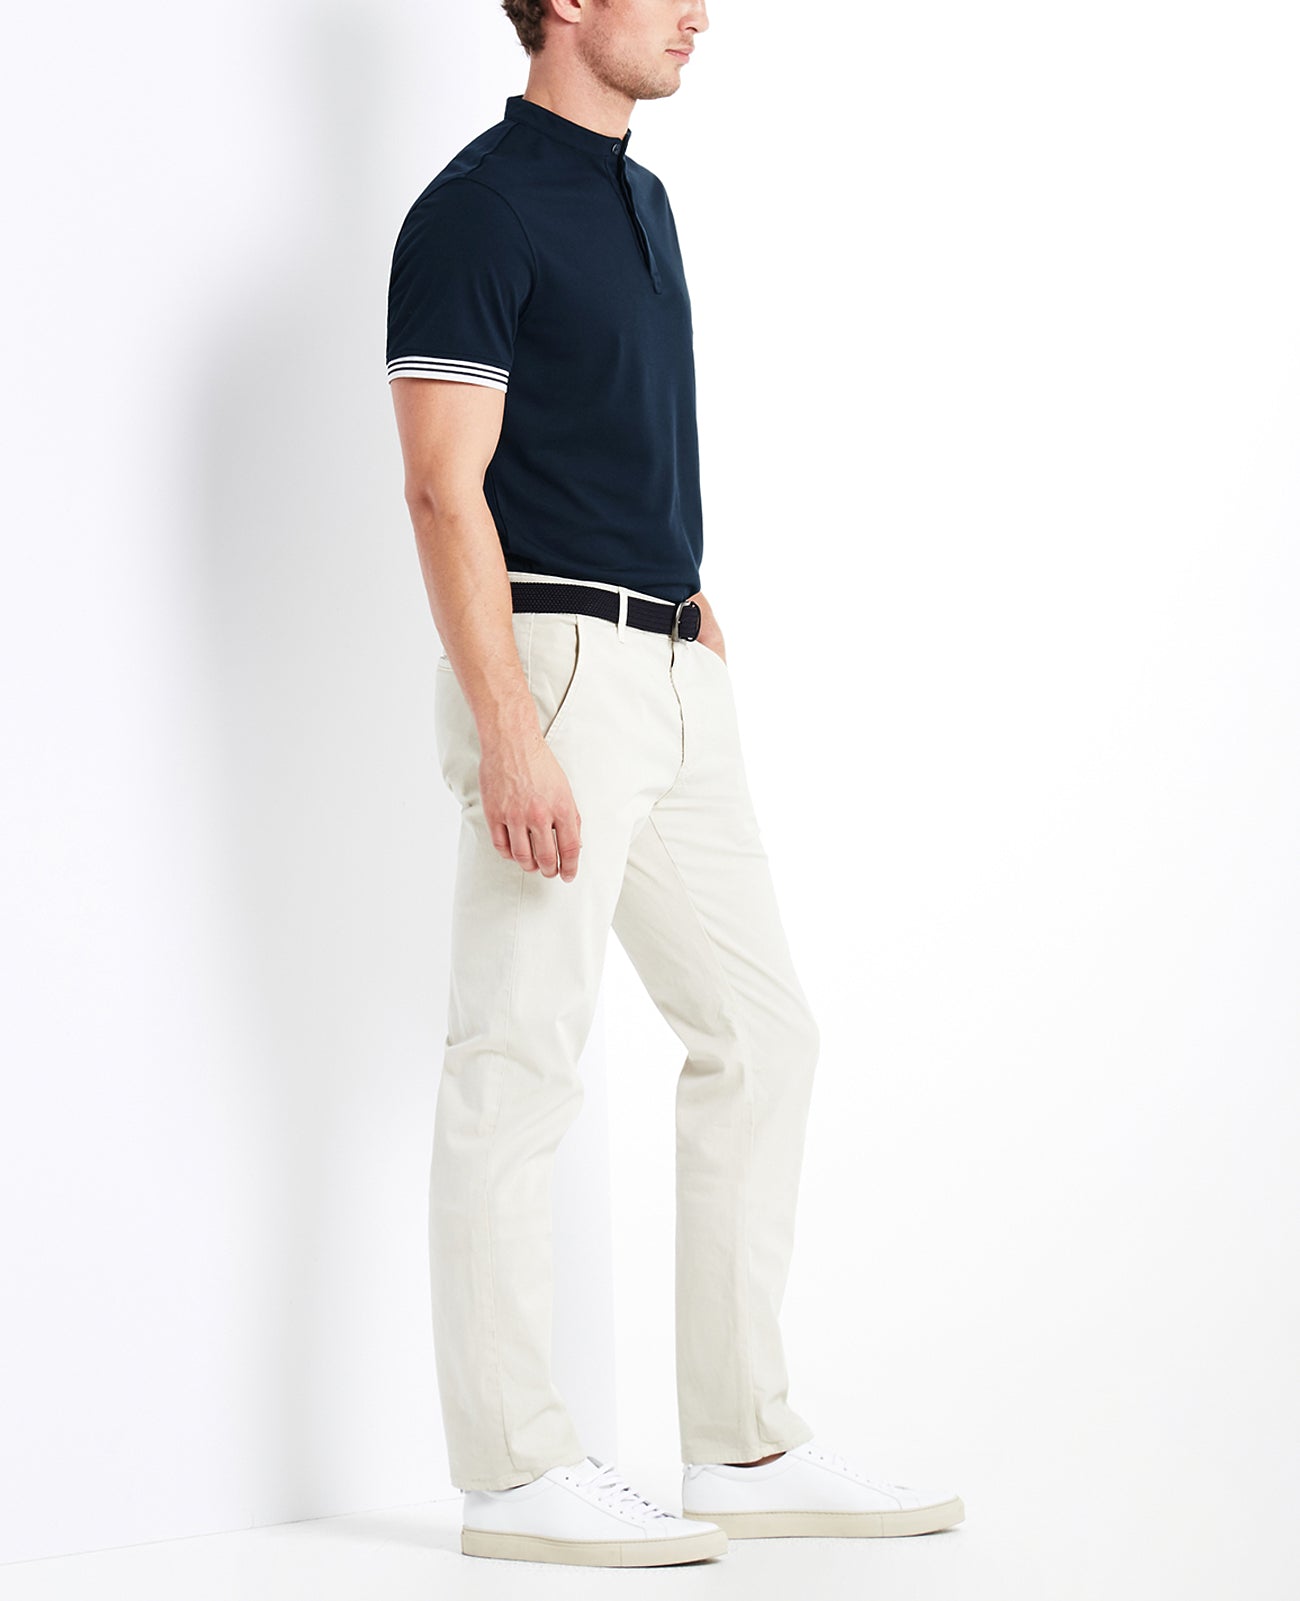 Haskett Polo Naval Blue Green Label Collection Men Tops Photo 2